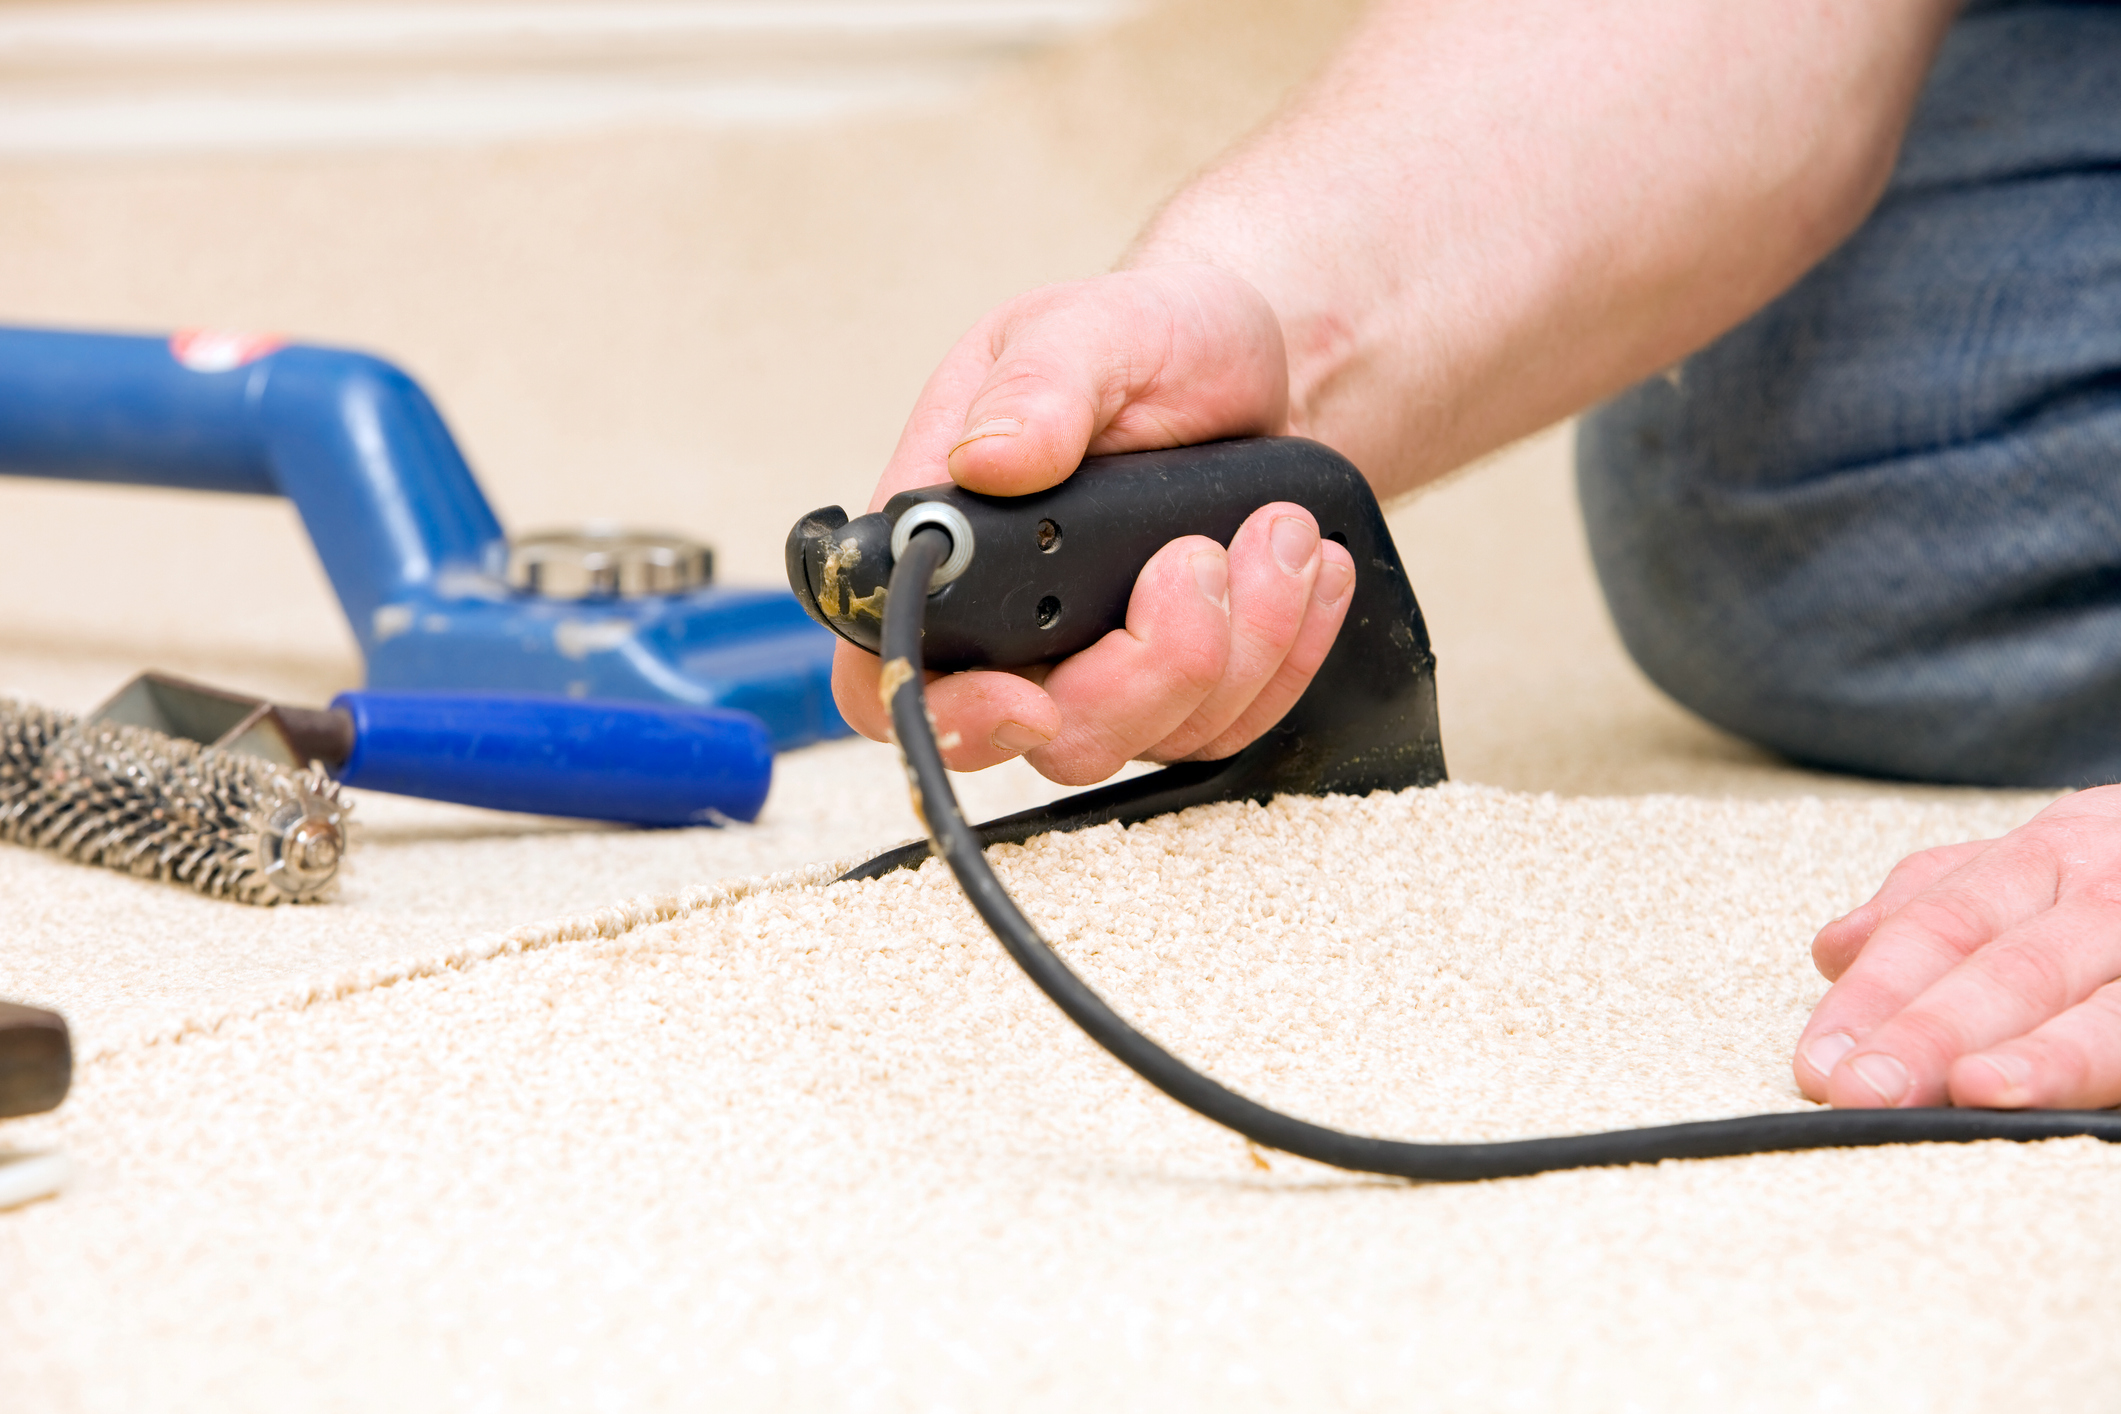 5 Reasons to Schedule a Professional Carpet Cleaning for Your Home or Business